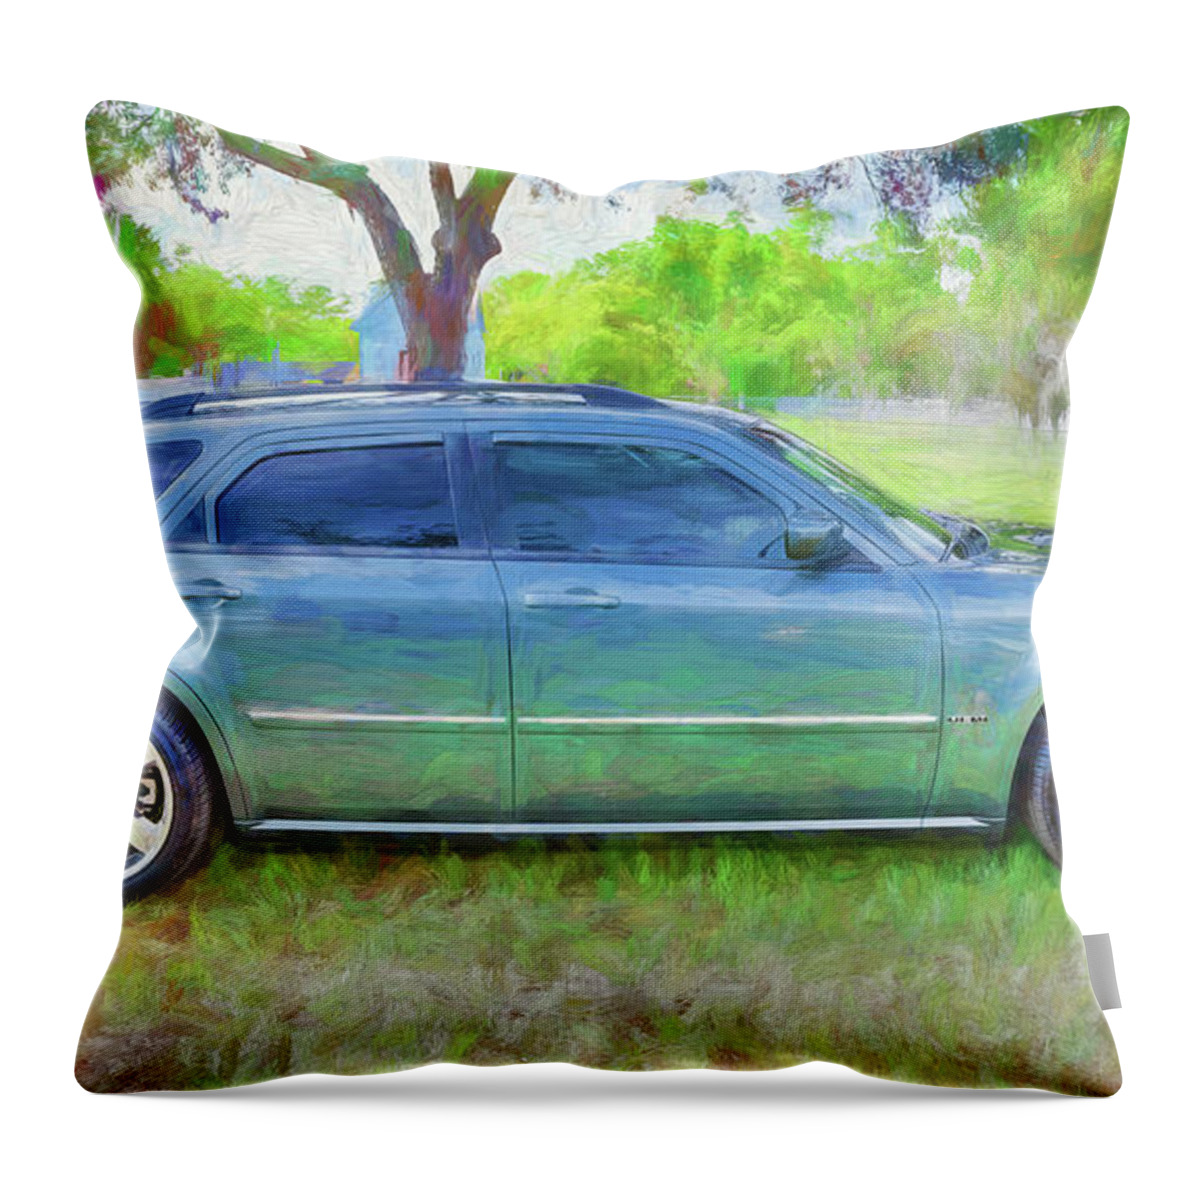 2006 Dodge Magnum Rt Throw Pillow featuring the photograph 2006 Dodge Magnum RT X108 by Rich Franco